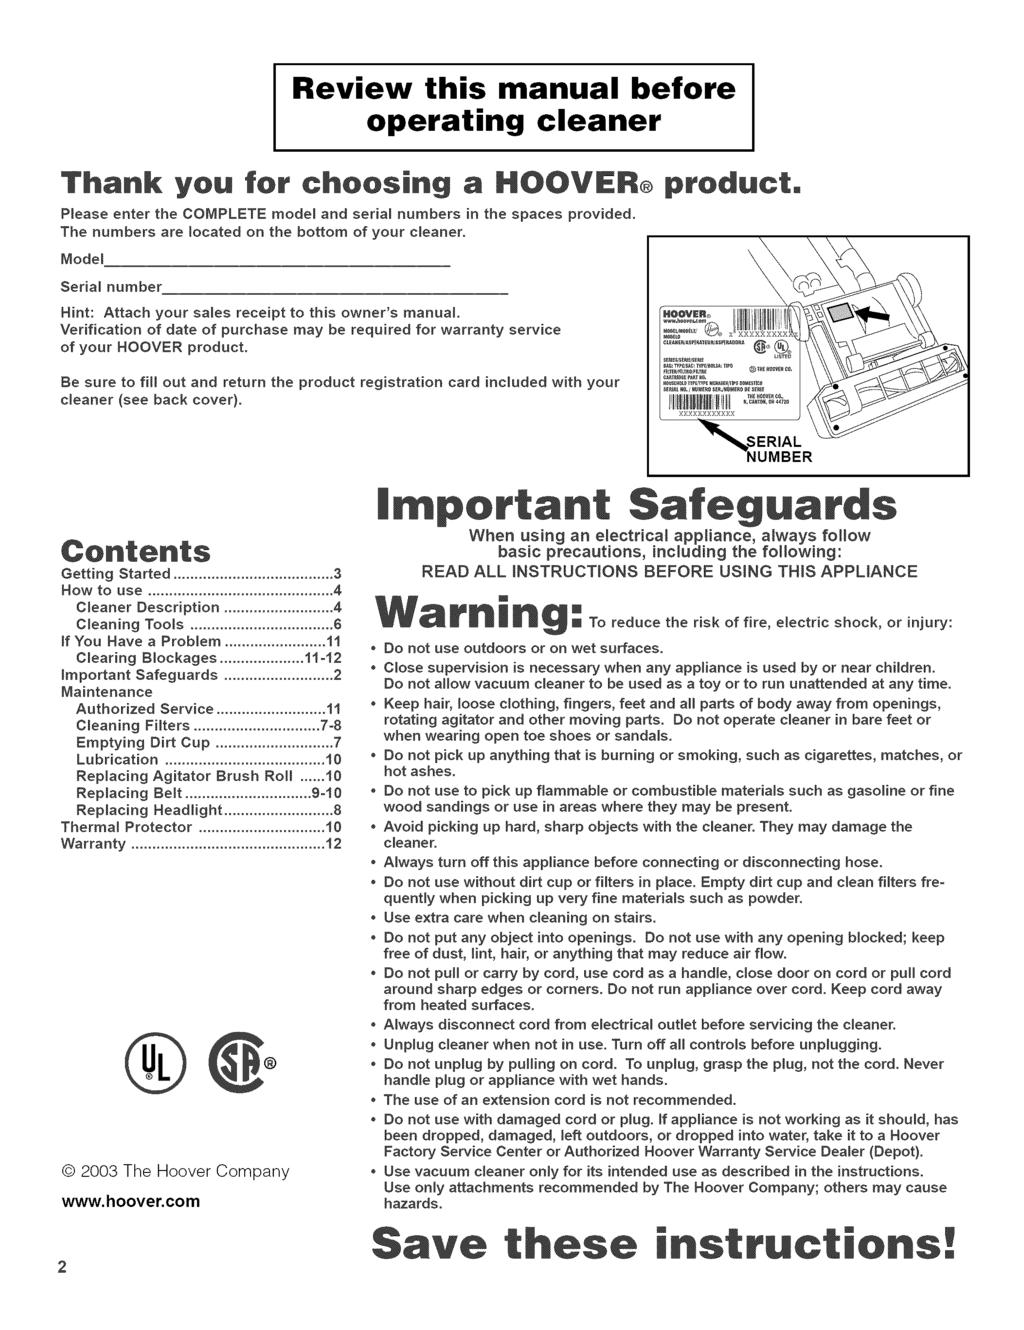 Review this manual before operating cleaner Thank yeu fer cheesing a HOOVER product, Pmease enter the COMPLETE model and serial numbers in the spaces provided.